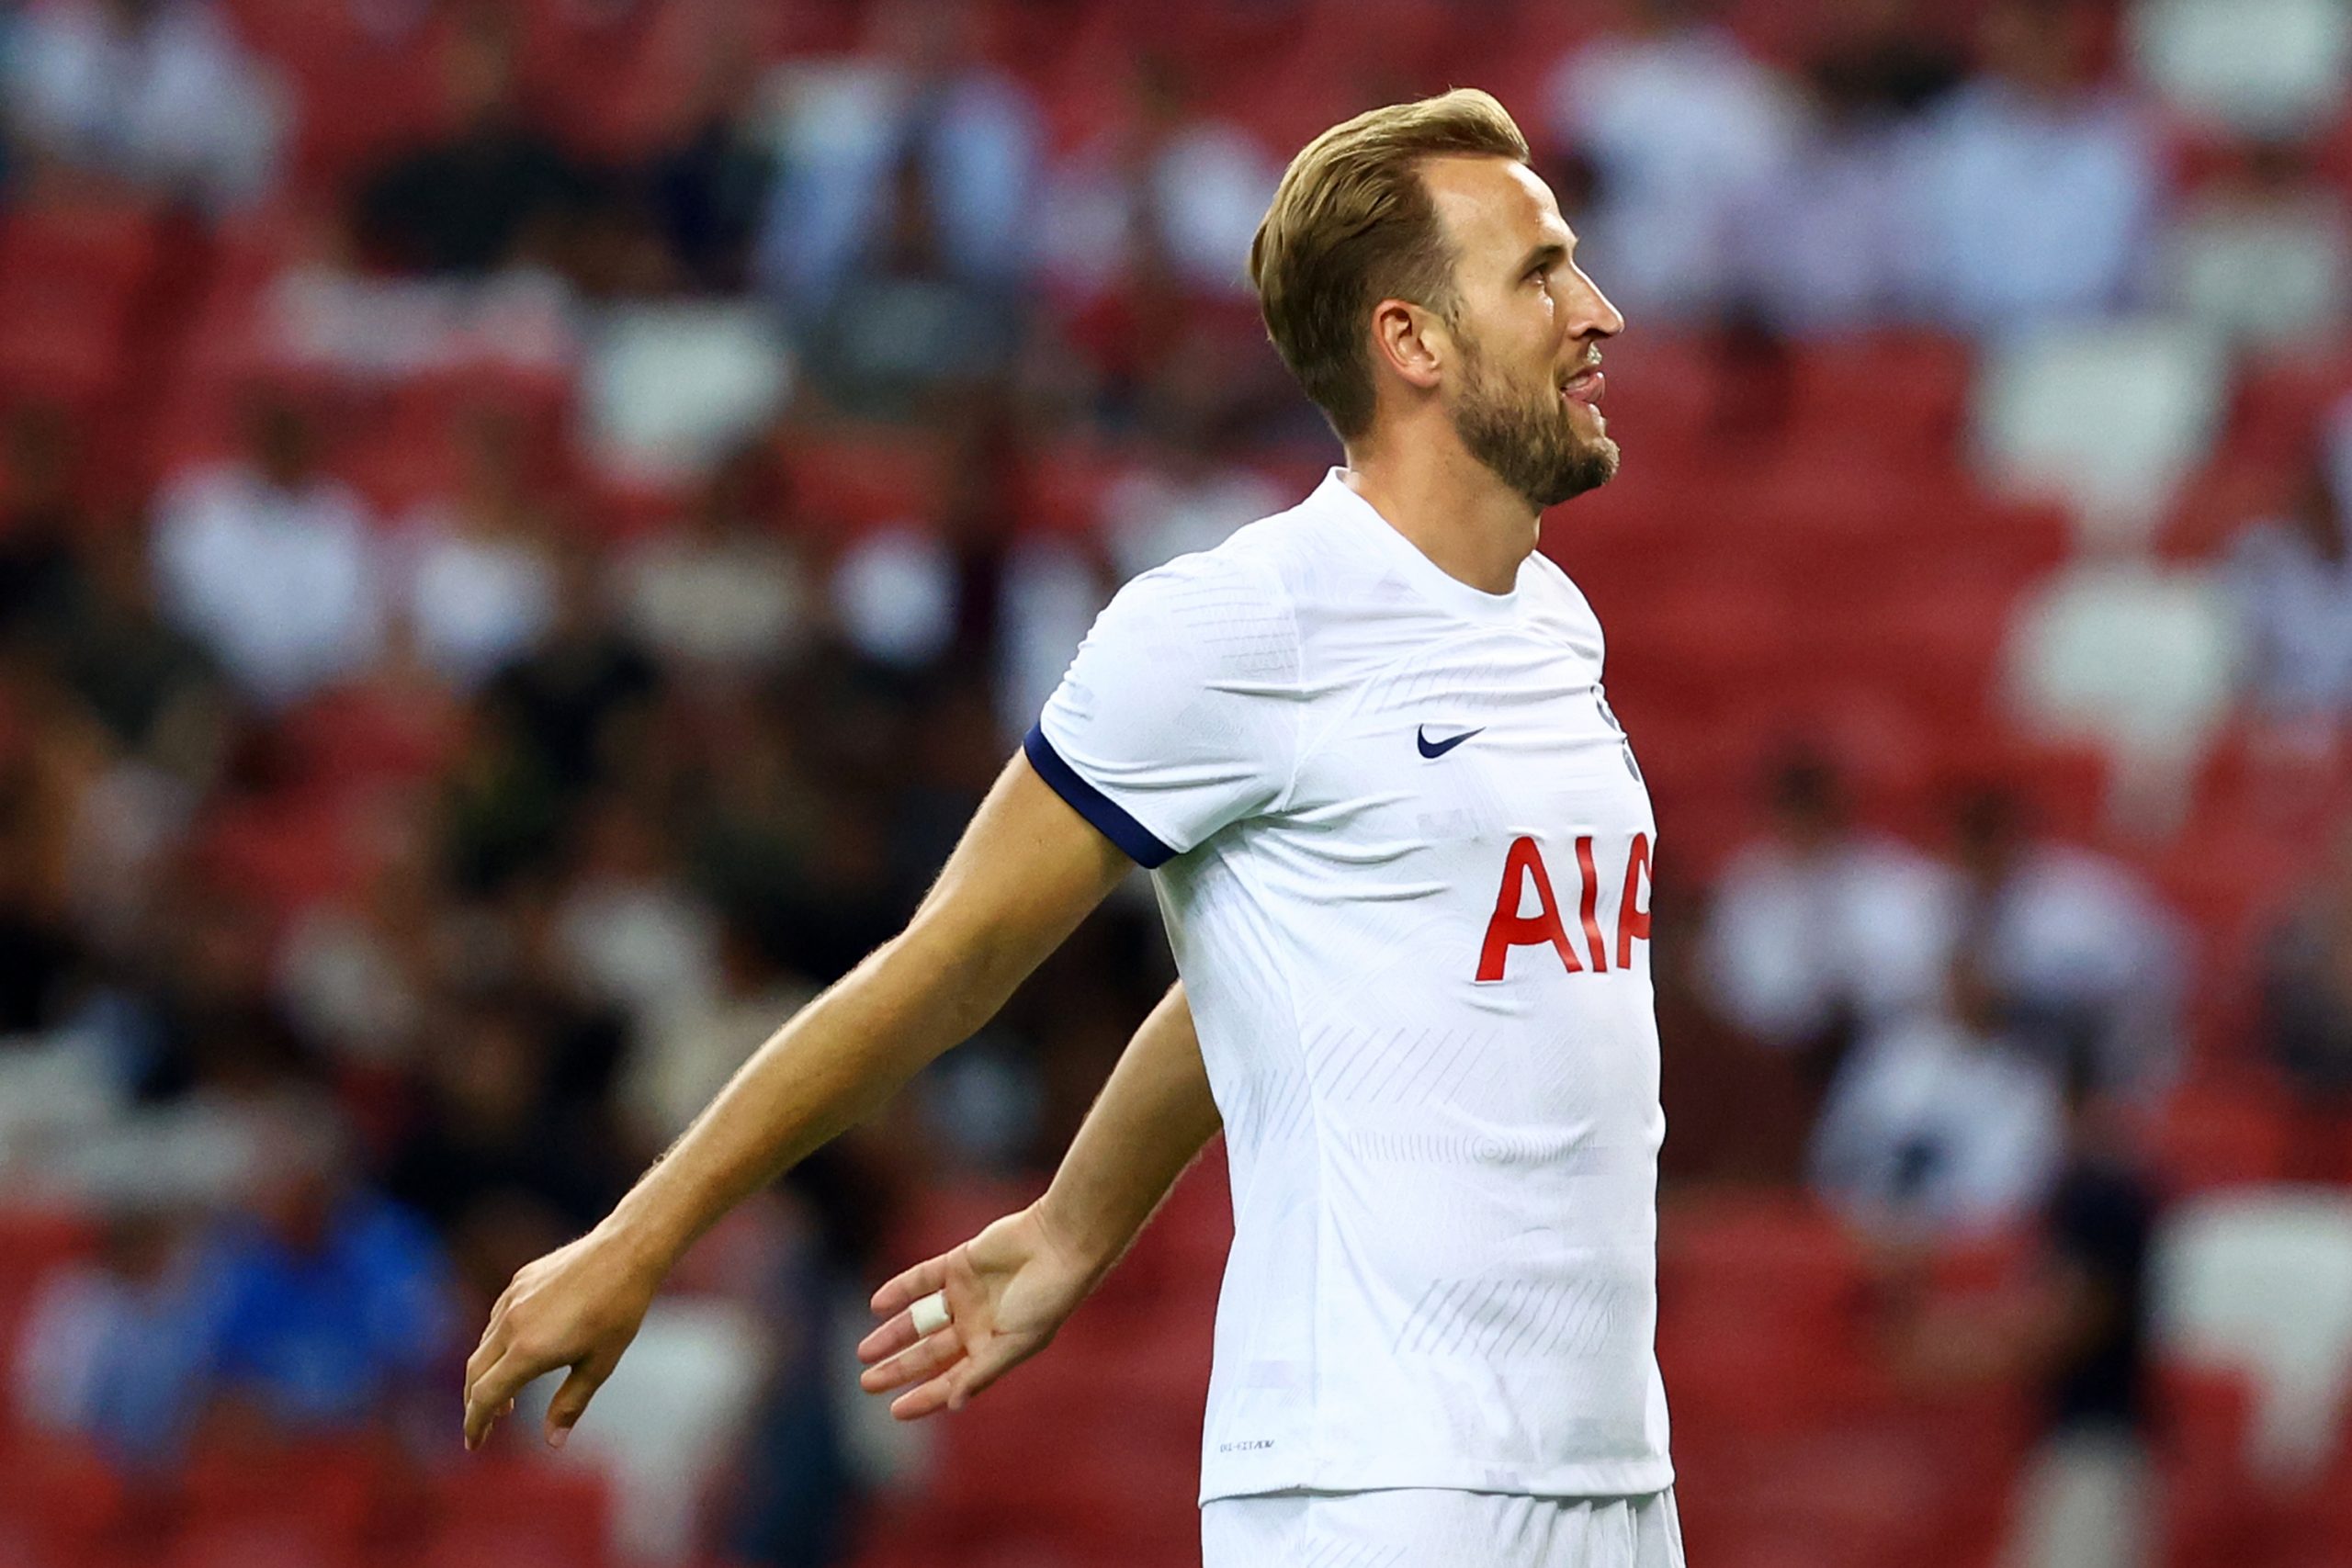 Alfie Whiteman says Harry Kane is the greatest Tottenham Hotspur player of all time.